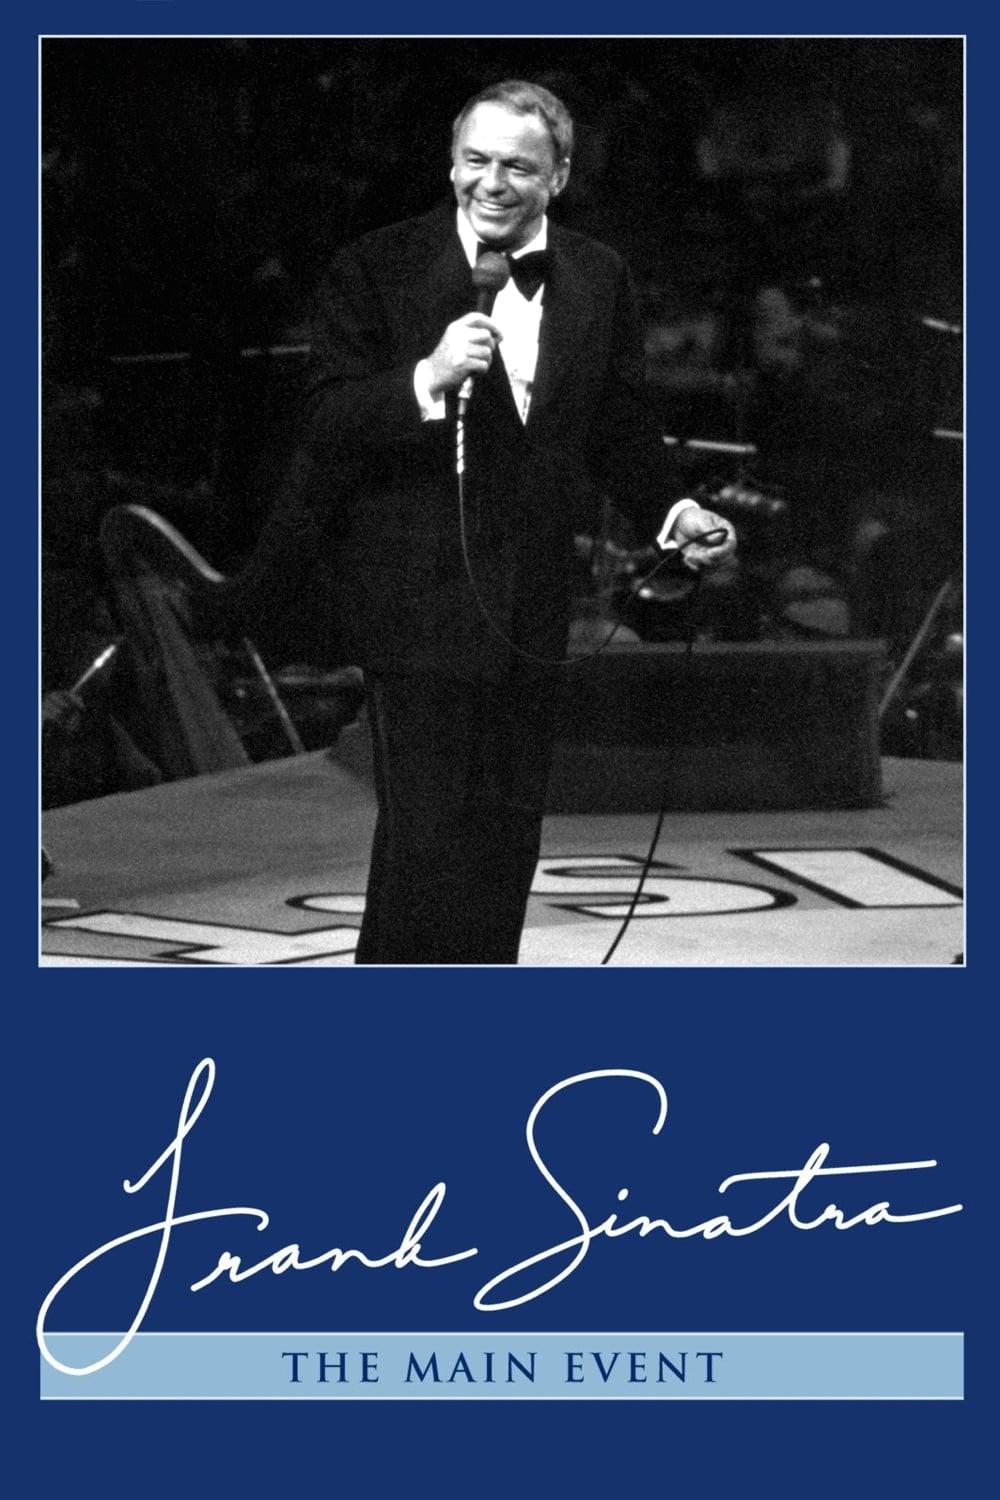 Frank Sinatra: The Main Event poster